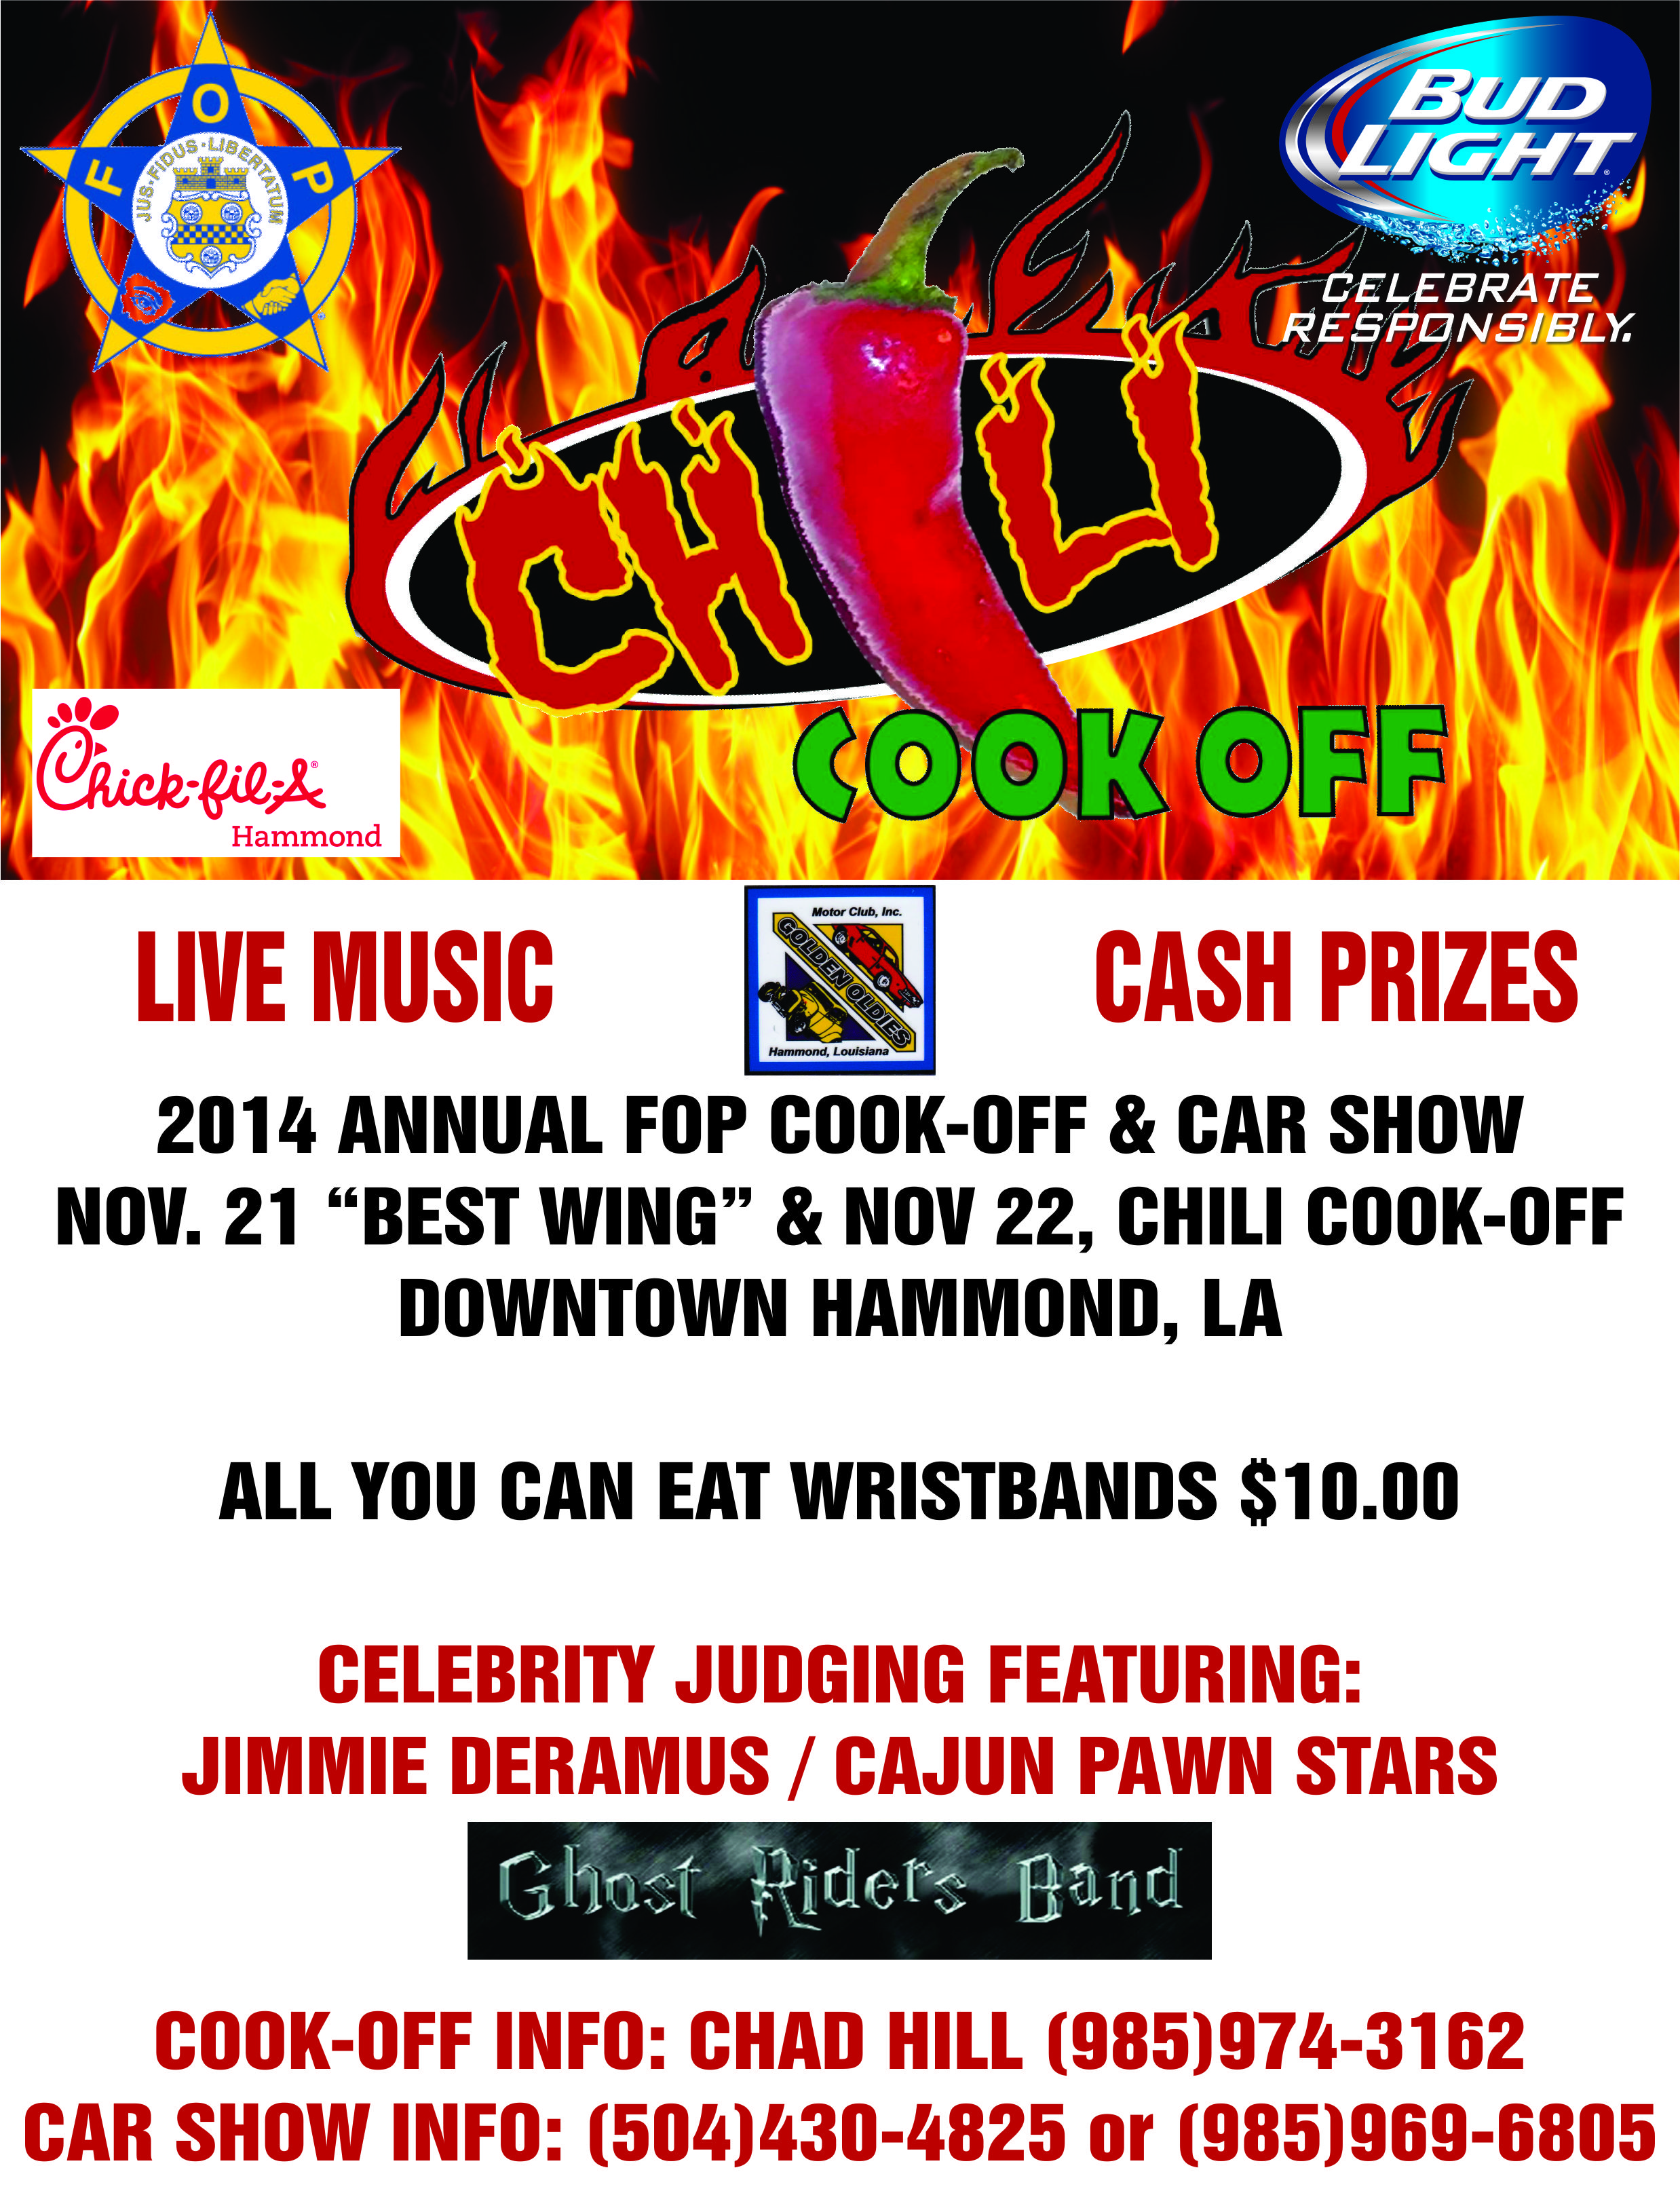 Chilli Cook-off with the Hammond Fraternal Order of Police